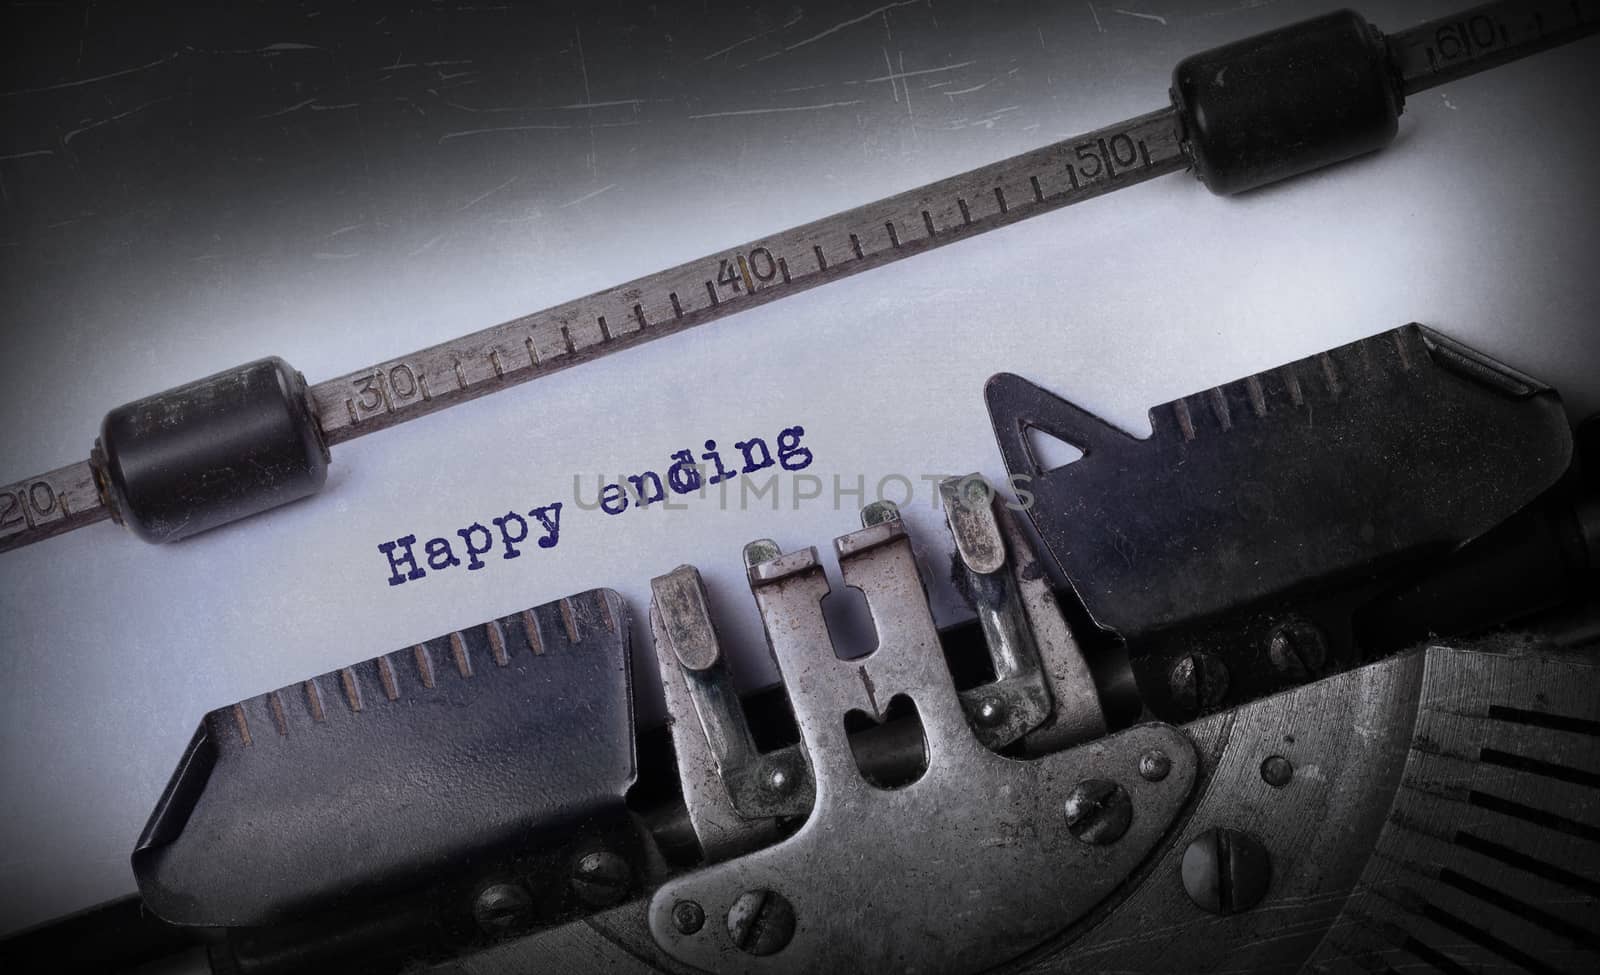 Vintage inscription made by old typewriter, Happy ending